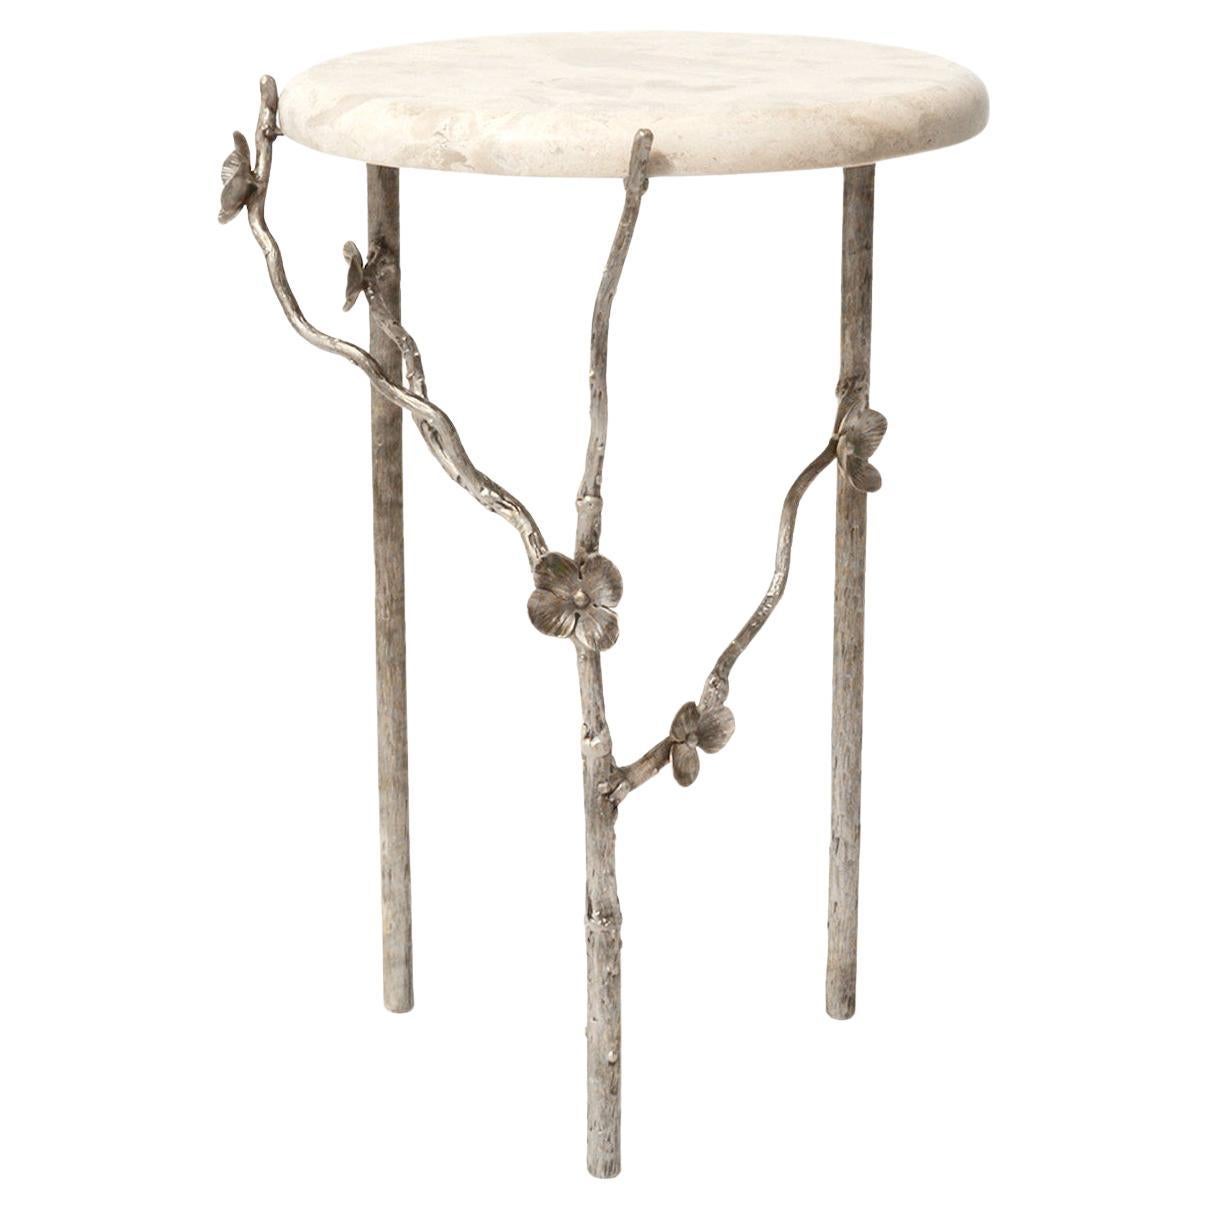 Modern Cherry Blossom Accent Table in Aged Silver